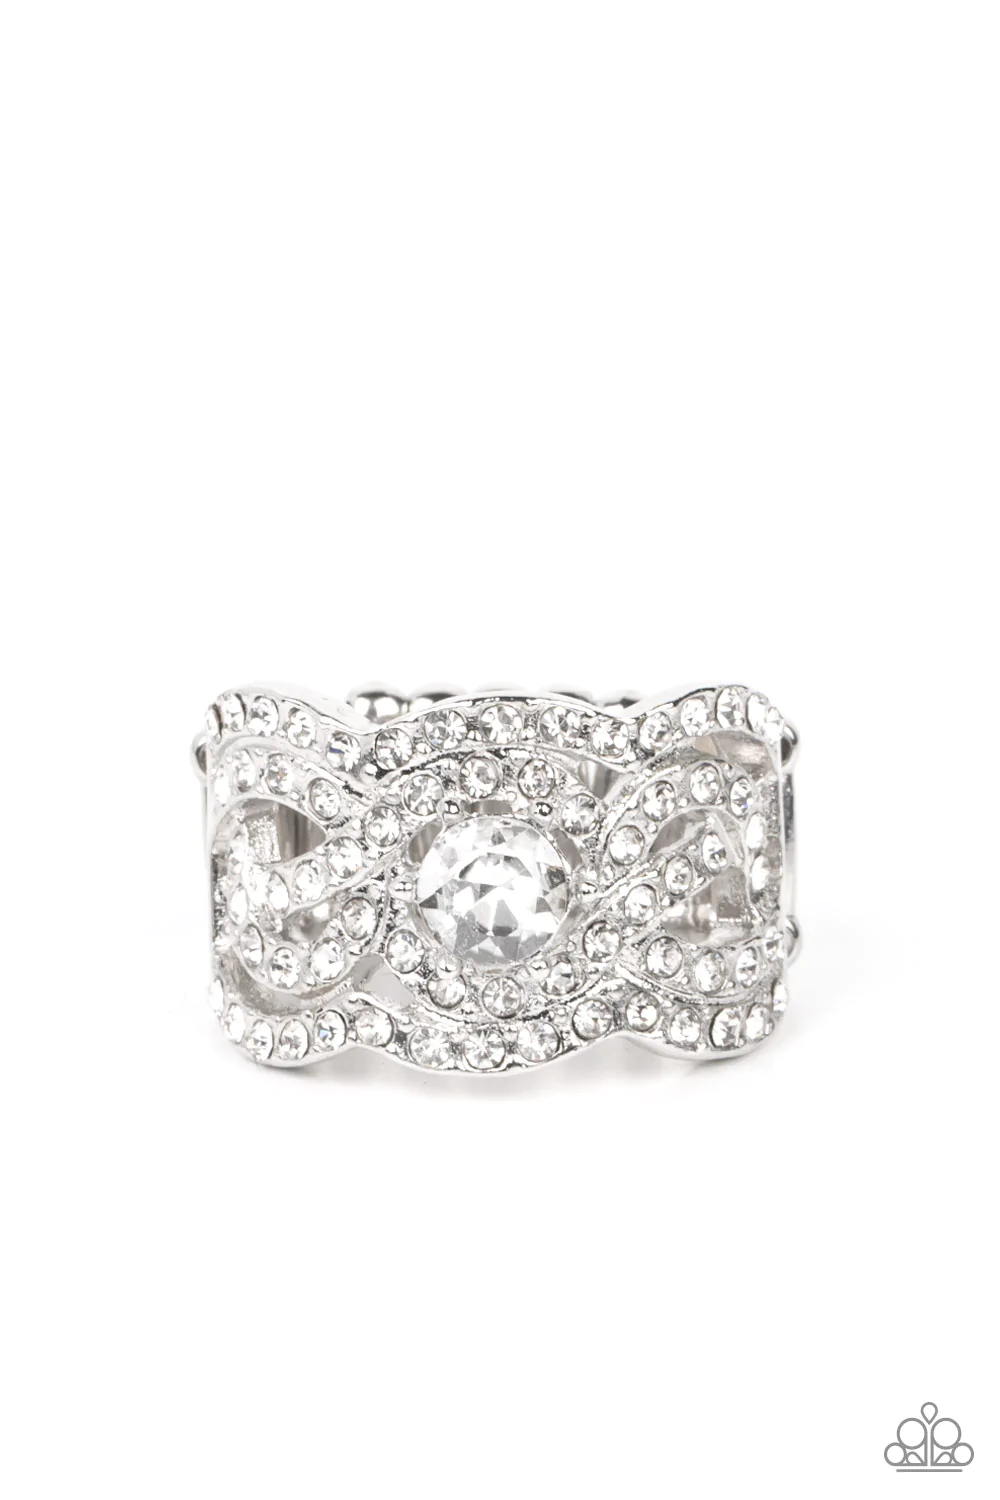 DOTING ON DAZZLE - WHITE CLEAR RHINESTONES LIFE OF THE PARTY RING